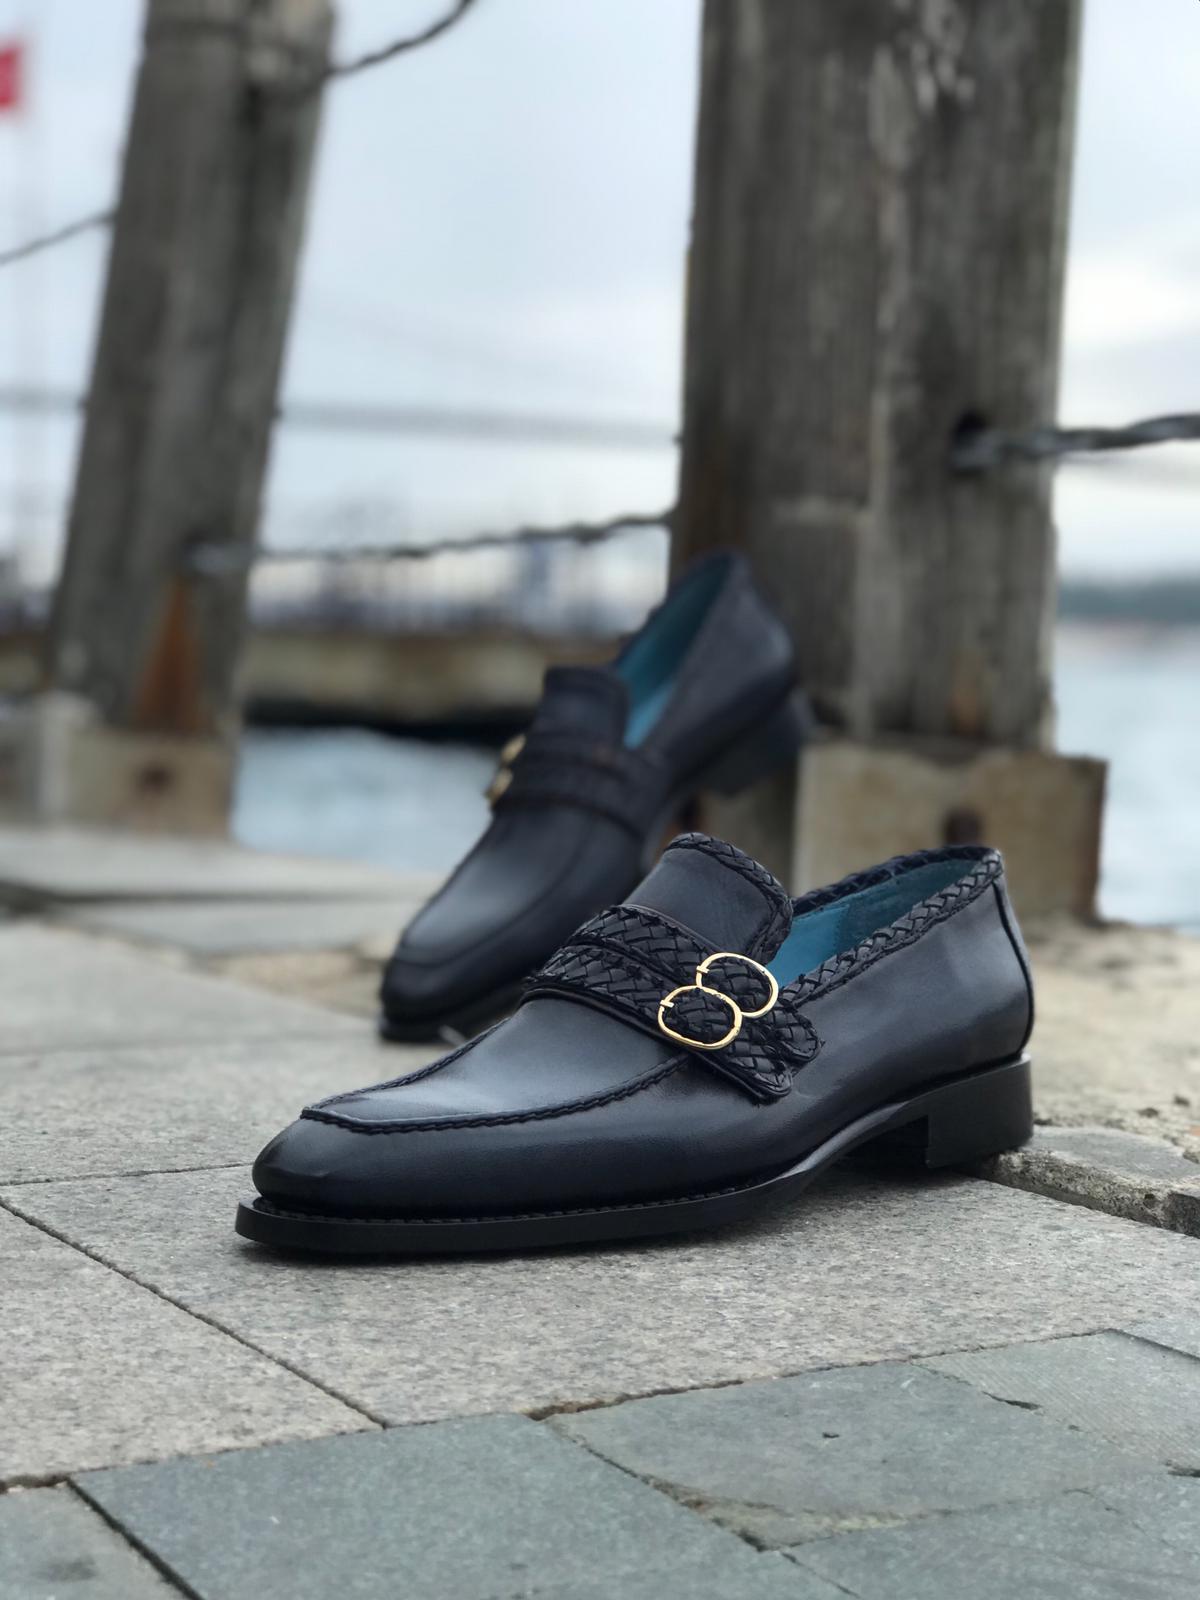 Buy Handmade Navy Blue Leather Loafers GentWith.com